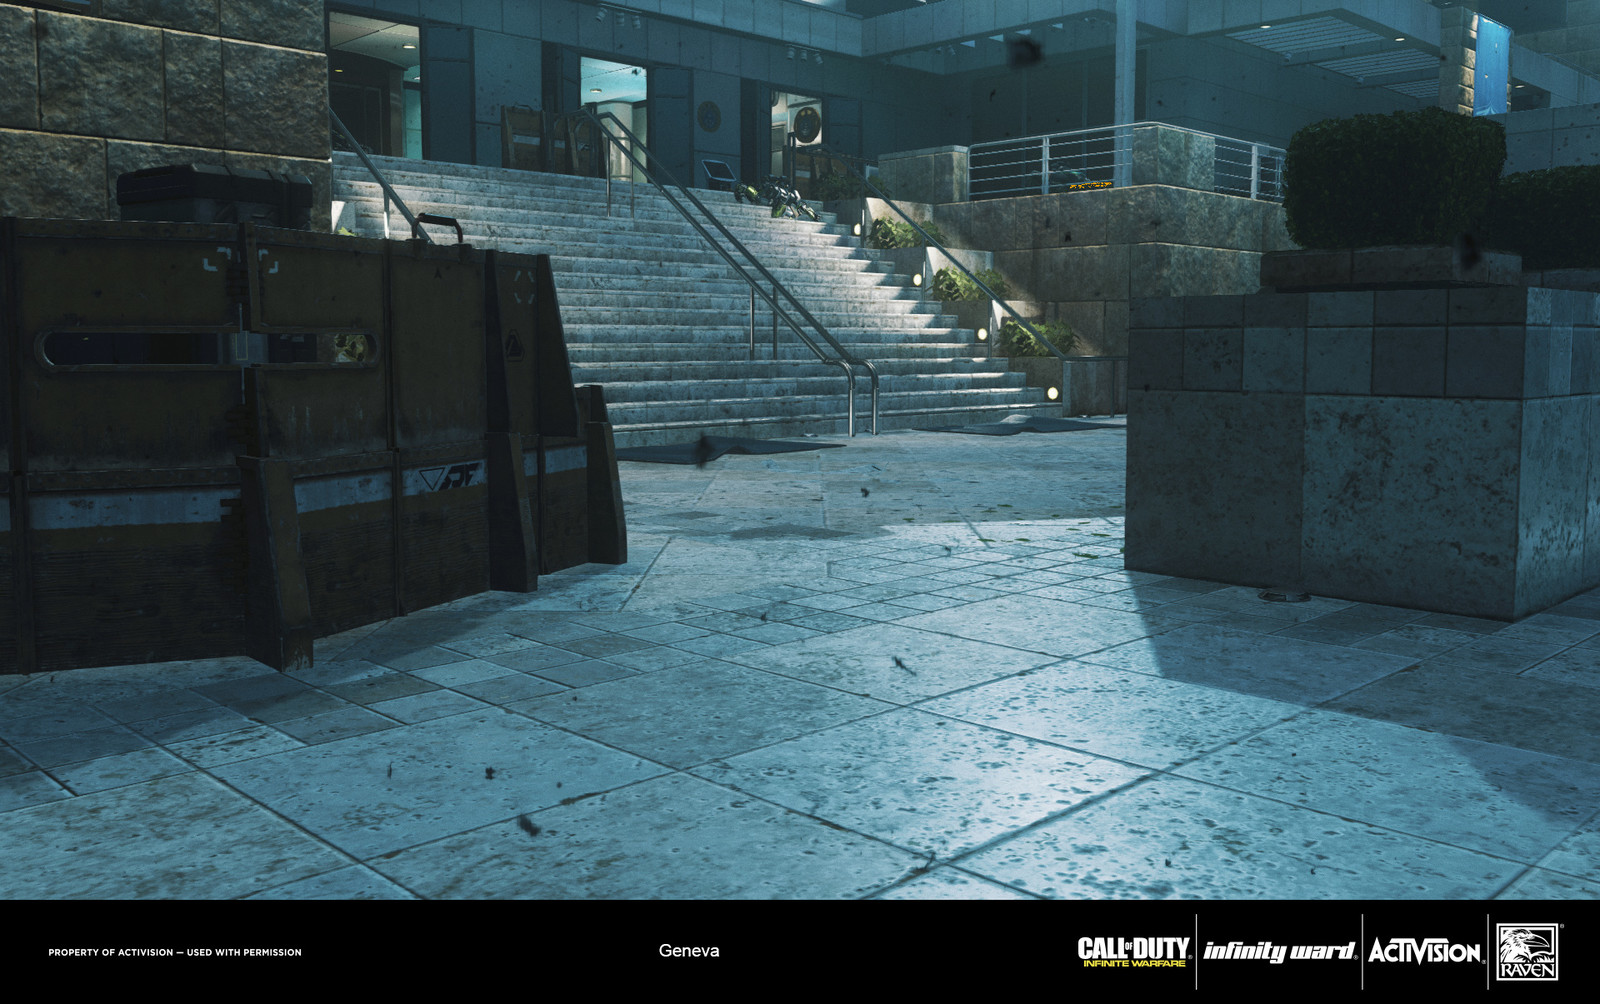 For this map I supplied multiple ground textures including wall materials, wood planks / interior paneling, asphalt / cobblestone blends, stone flooring, wall panels, dirt blends, and vehicle textures.